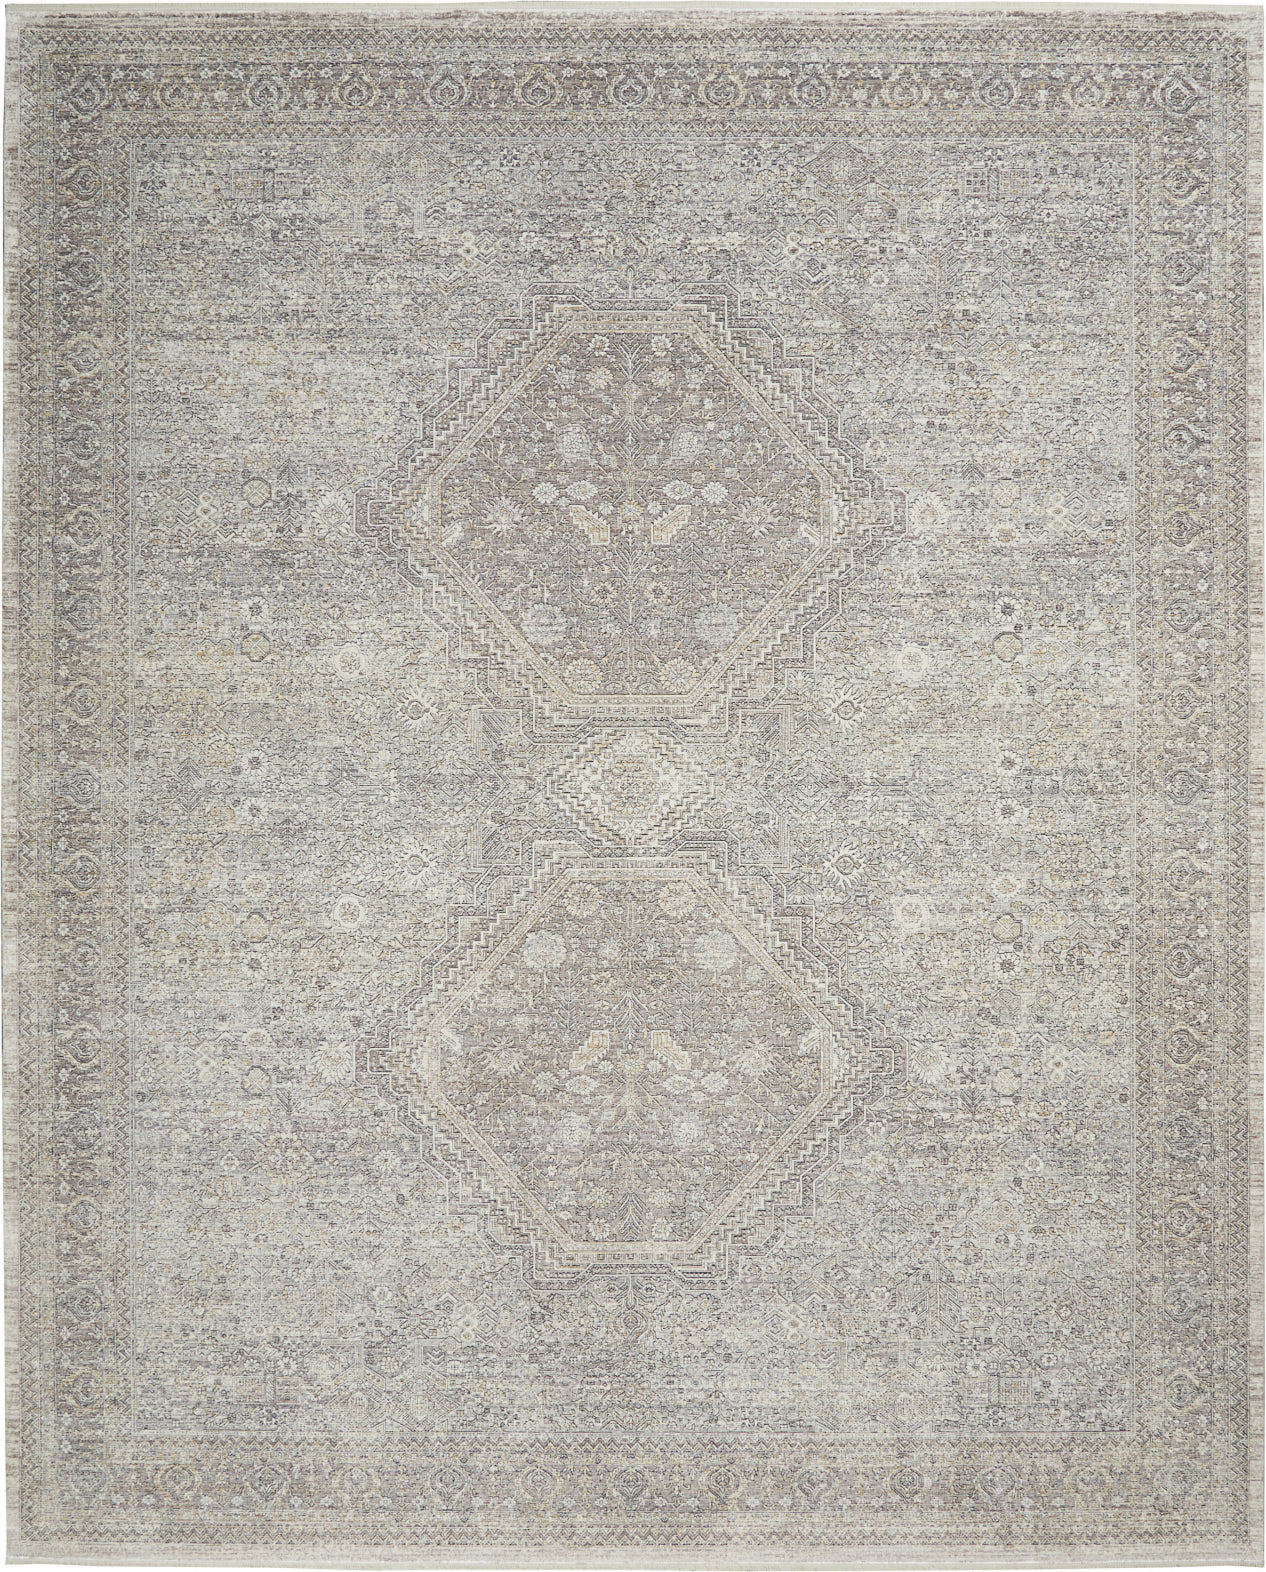 Starry Nights STN04 Cream Grey Area Rug by Nourison Main Image 